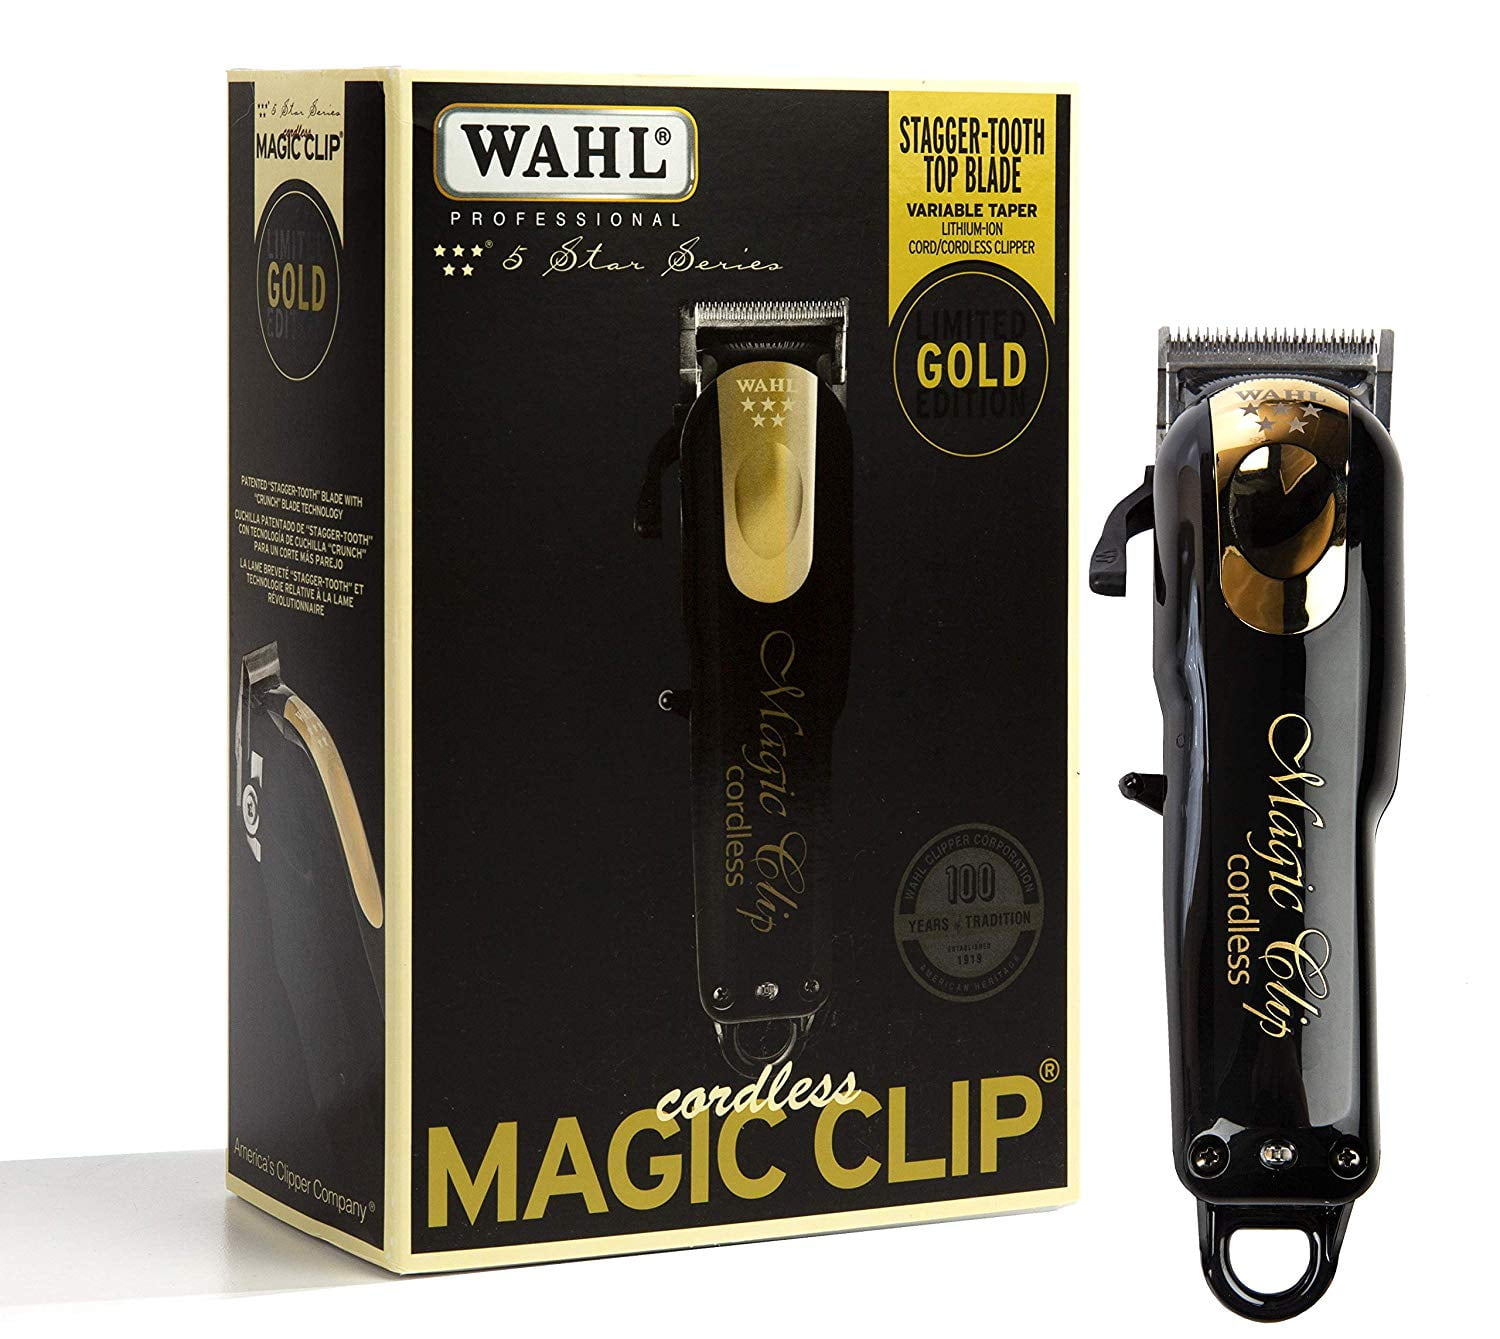 Wahl Professional 5-Star Limited Edition Black & Gold Cordless Magic Clip  #8148 - Great for Professional Stylists and Barbers